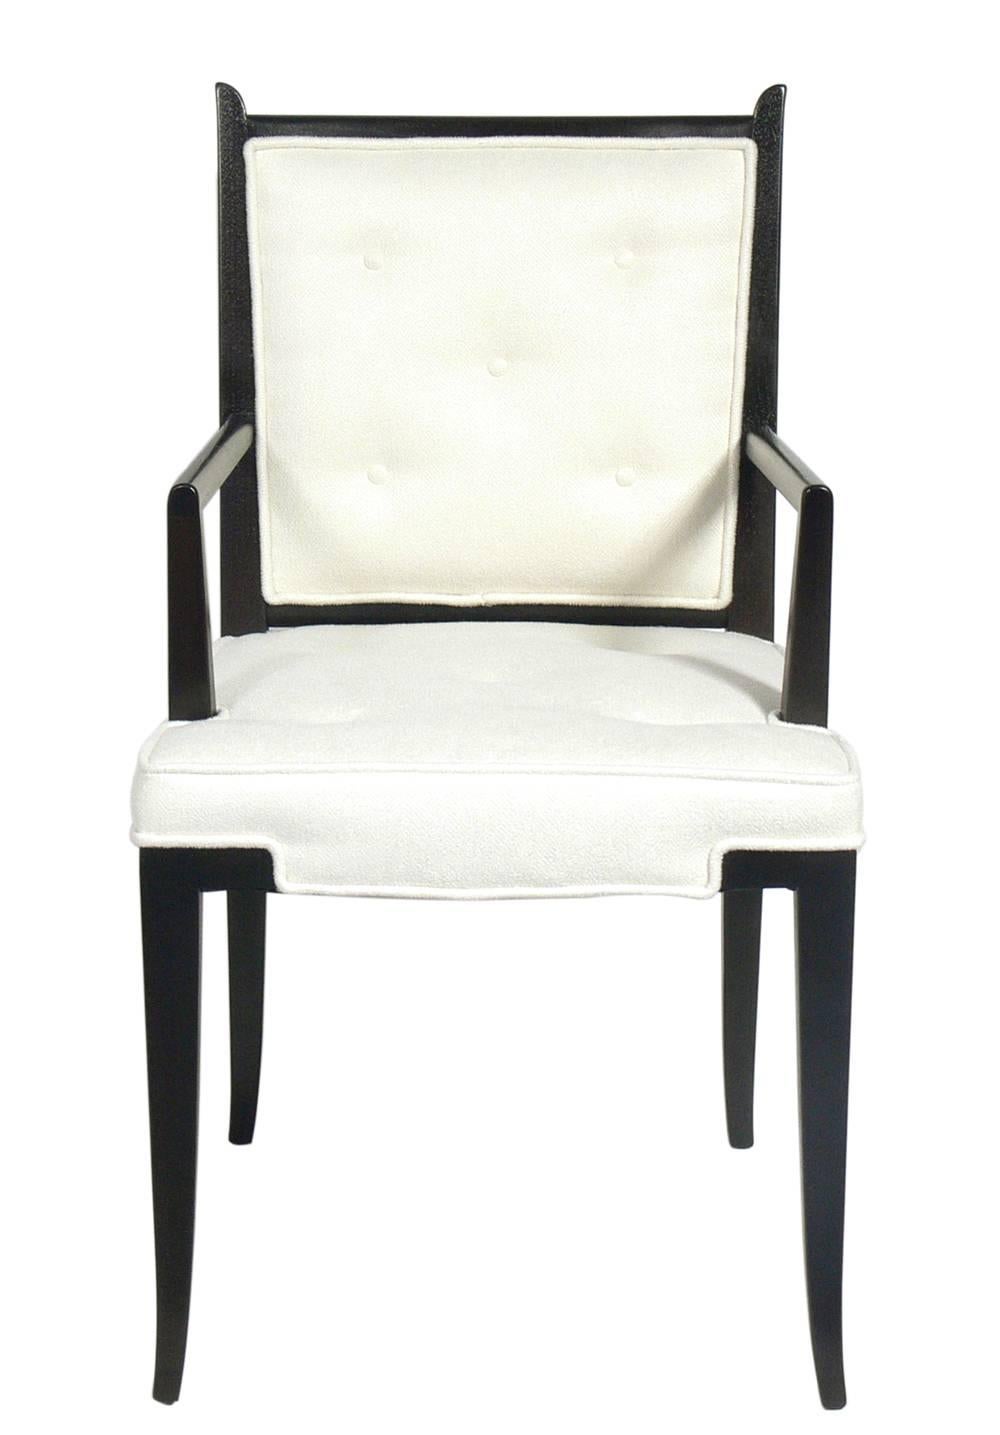 Pair of Tommi Parzinger chairs, American, circa 1950s. They are a versatile size and can be used as lounge or occasional chairs in a living area or bedroom, or as dining or game table chairs. They have been completely restored in an ivory color